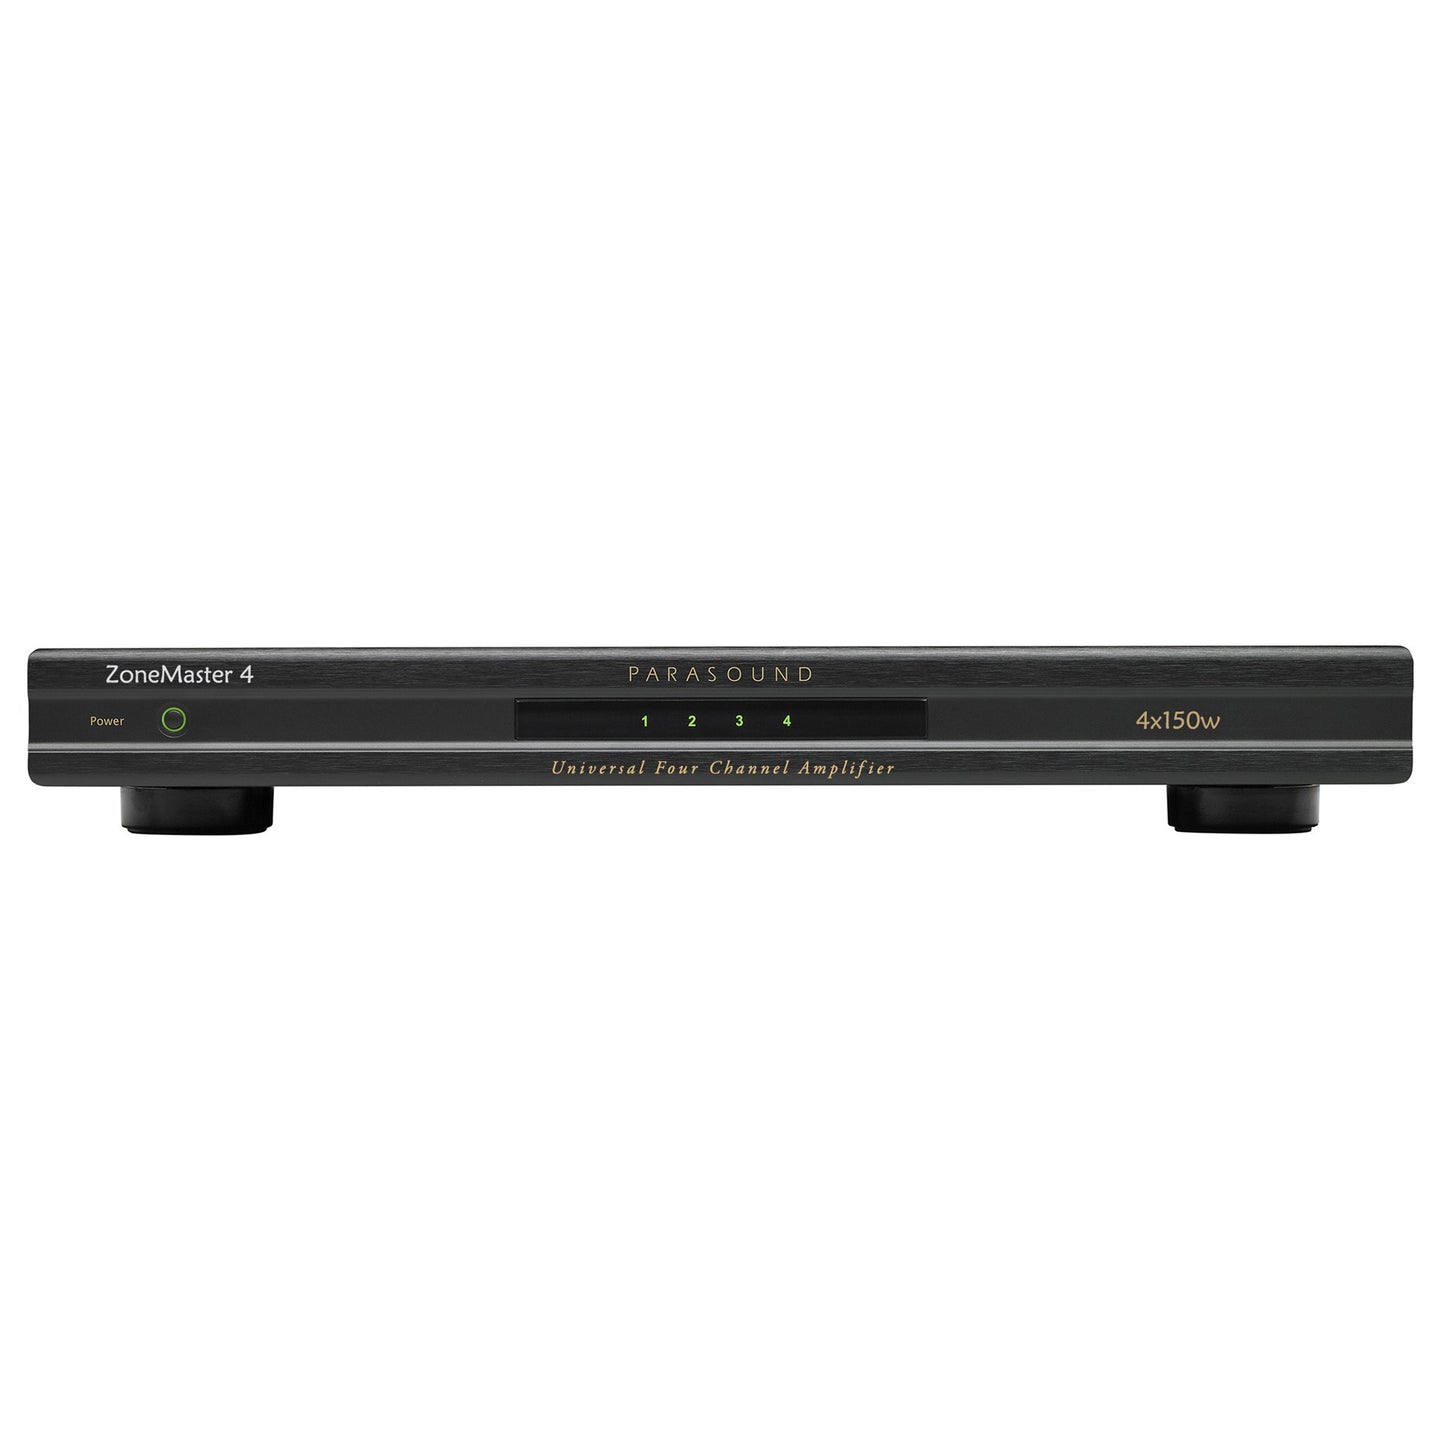 Parasound ZoneMaster 4 Four Channel / 8 Speaker Amplifier with Subwoofer Crossover